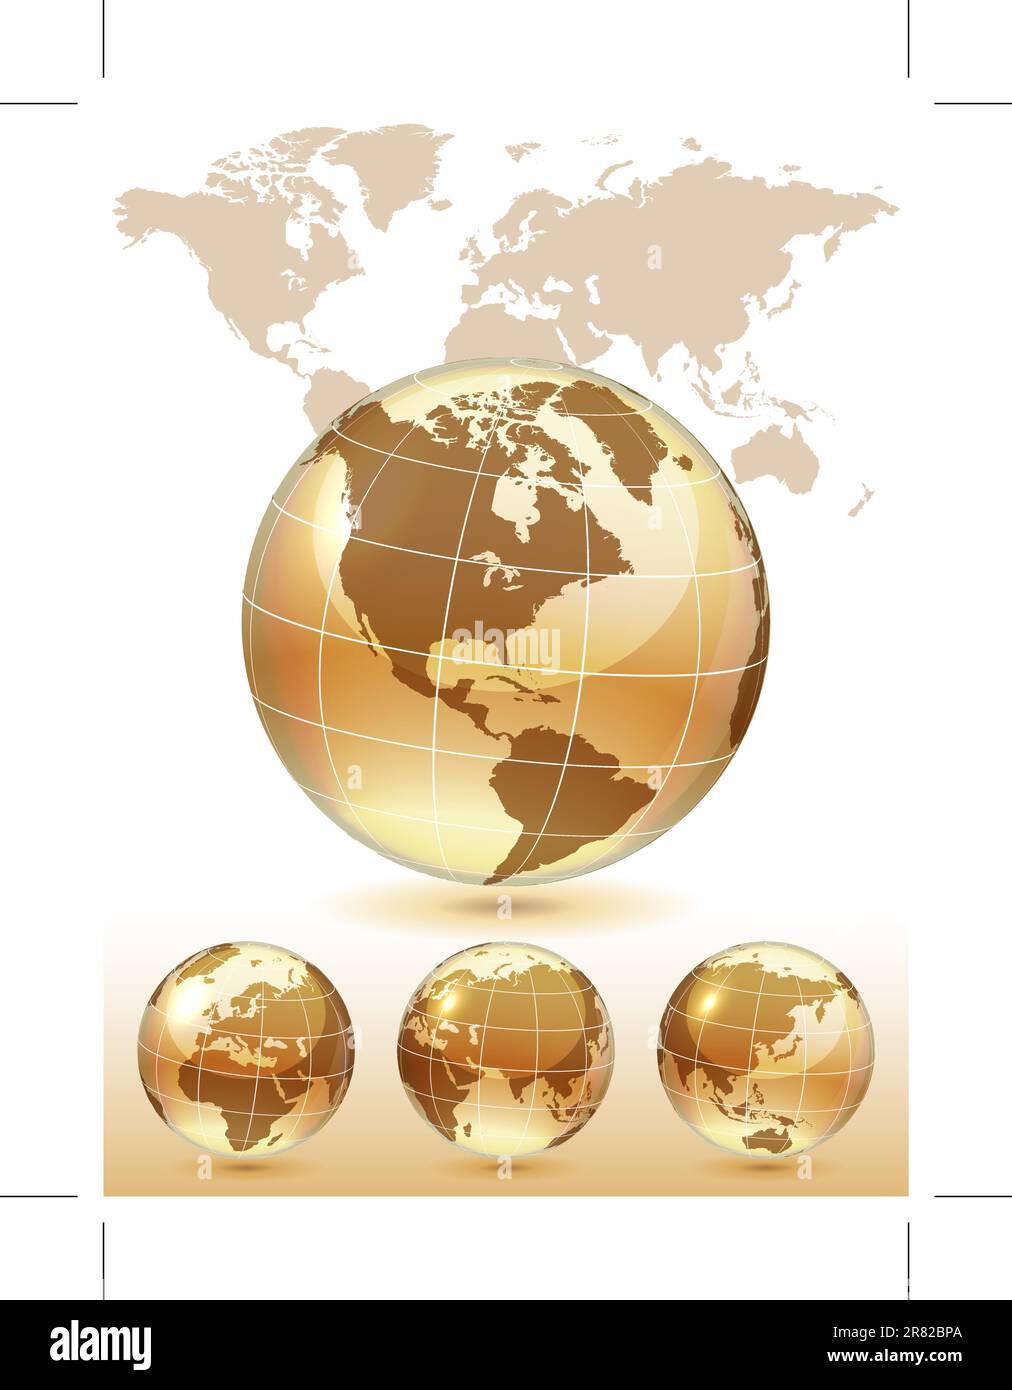 Different views of golden glass globe, map included, vector illustration, eps 10, 3 layers Stock Vector